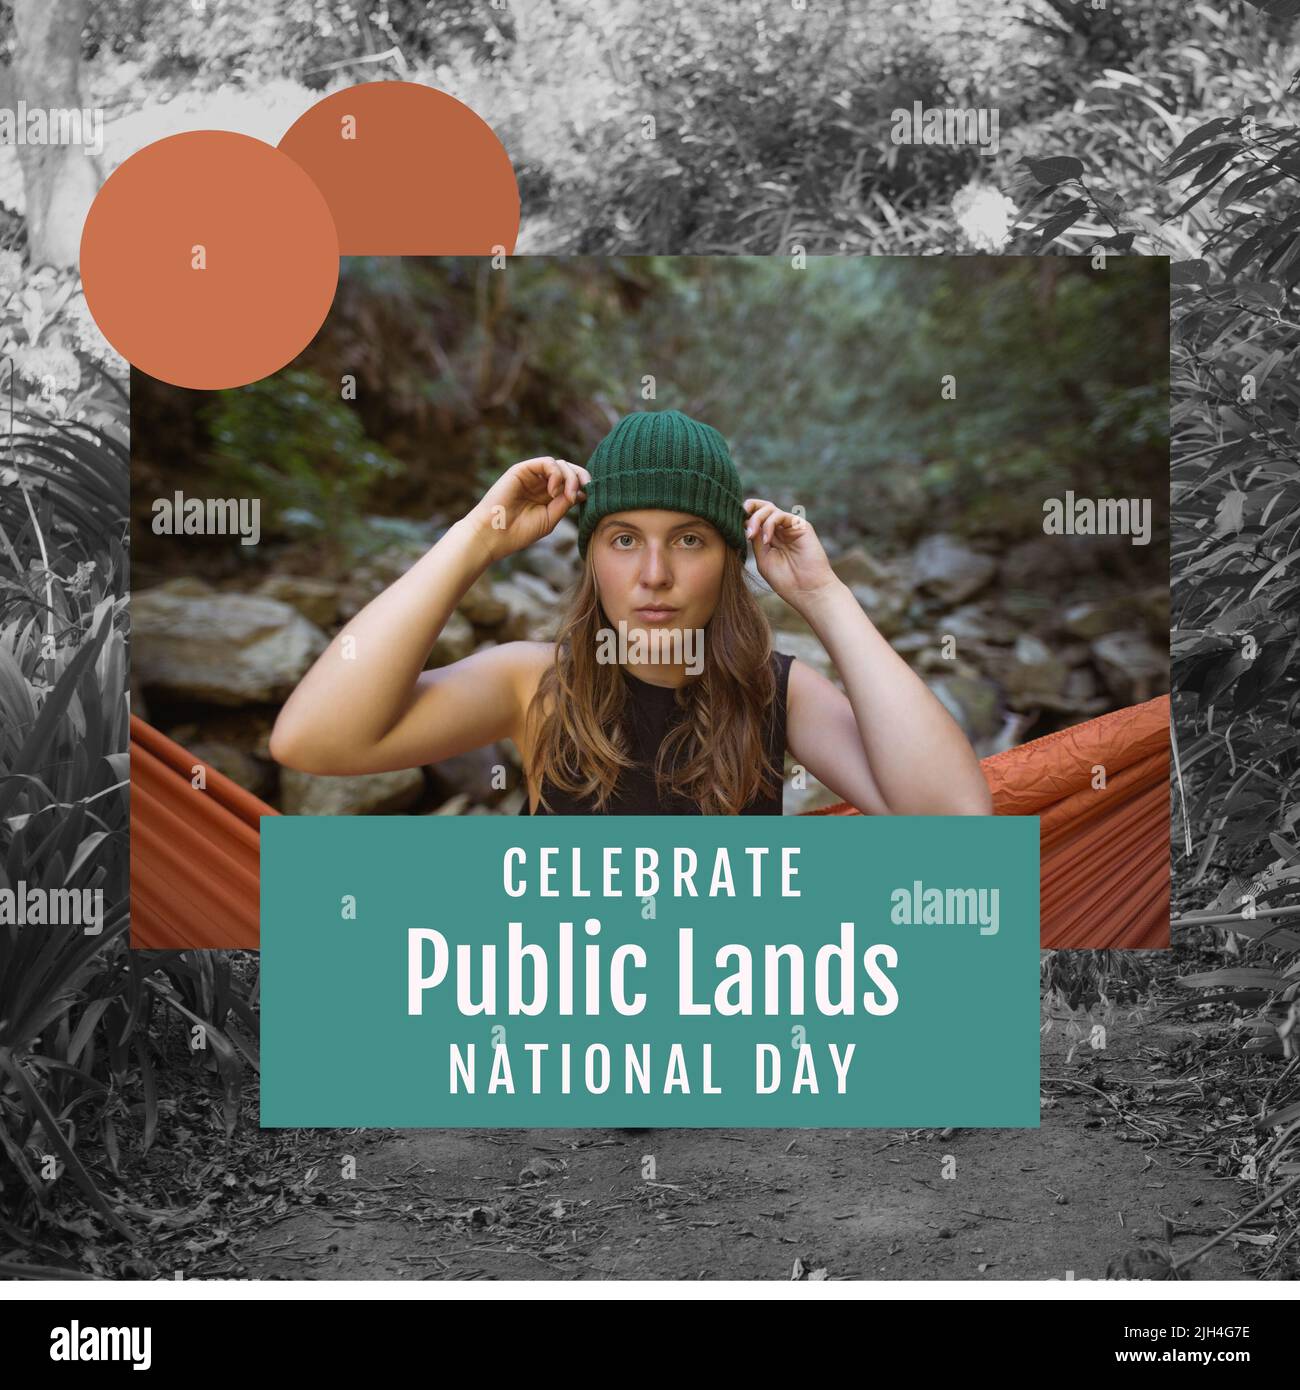 Composition of celebrate national public lands day text with caucasian woman hiking and landscape Stock Photo